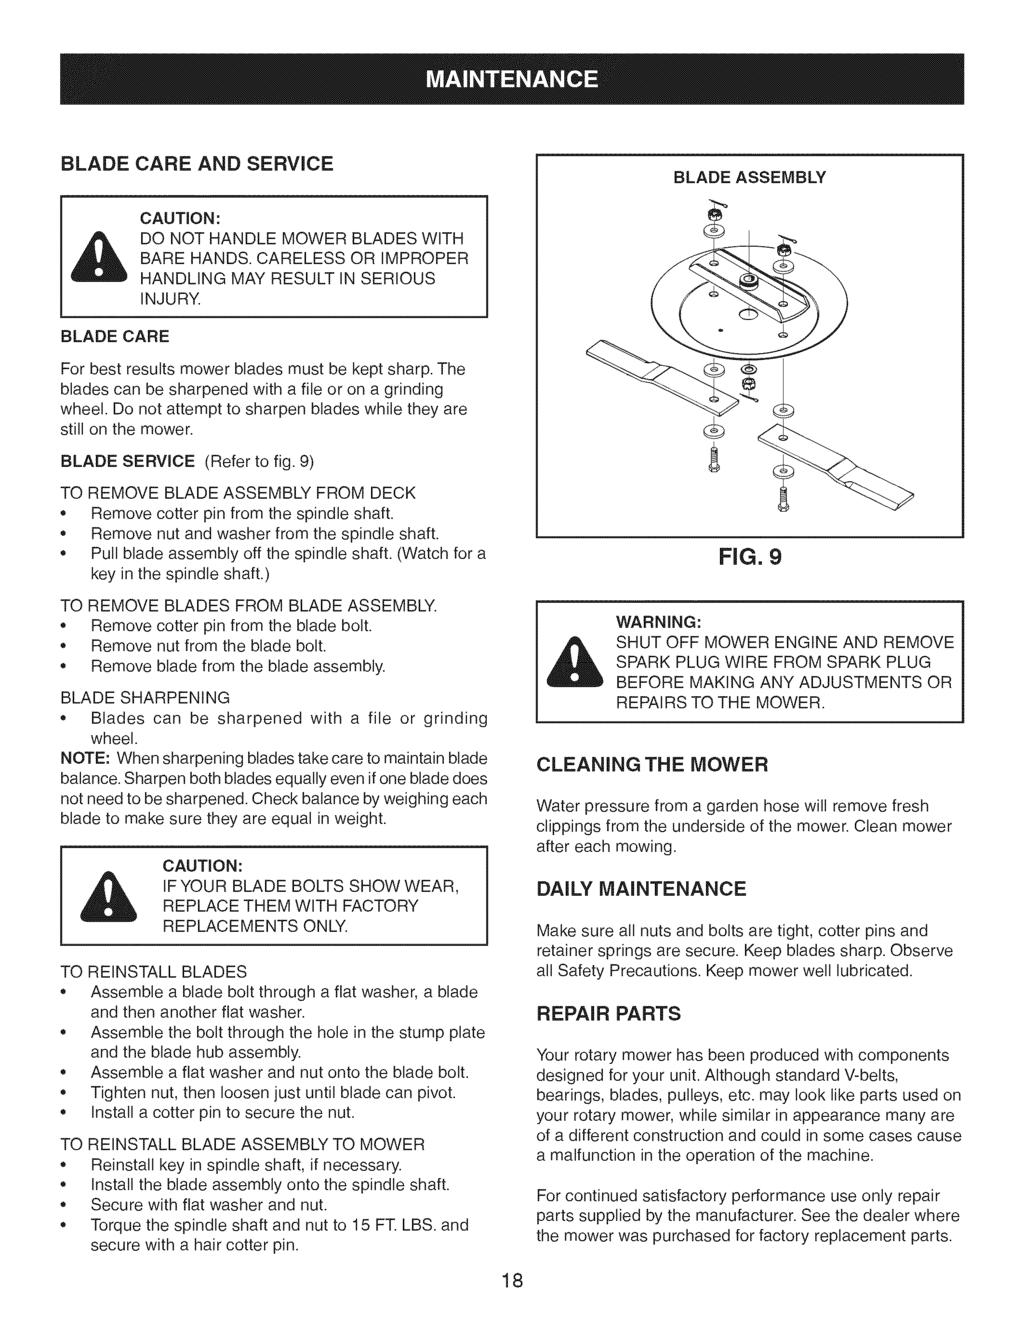 BLADE CARE AND SERVICE BLADE ASSEMBLY CAUTION: DO NOT HANDLE MOWER BLADES WITH BARE HANDS. CARELESS OR IMPROPER HANDLING MAY RESULT IN SERIOUS INJURY.